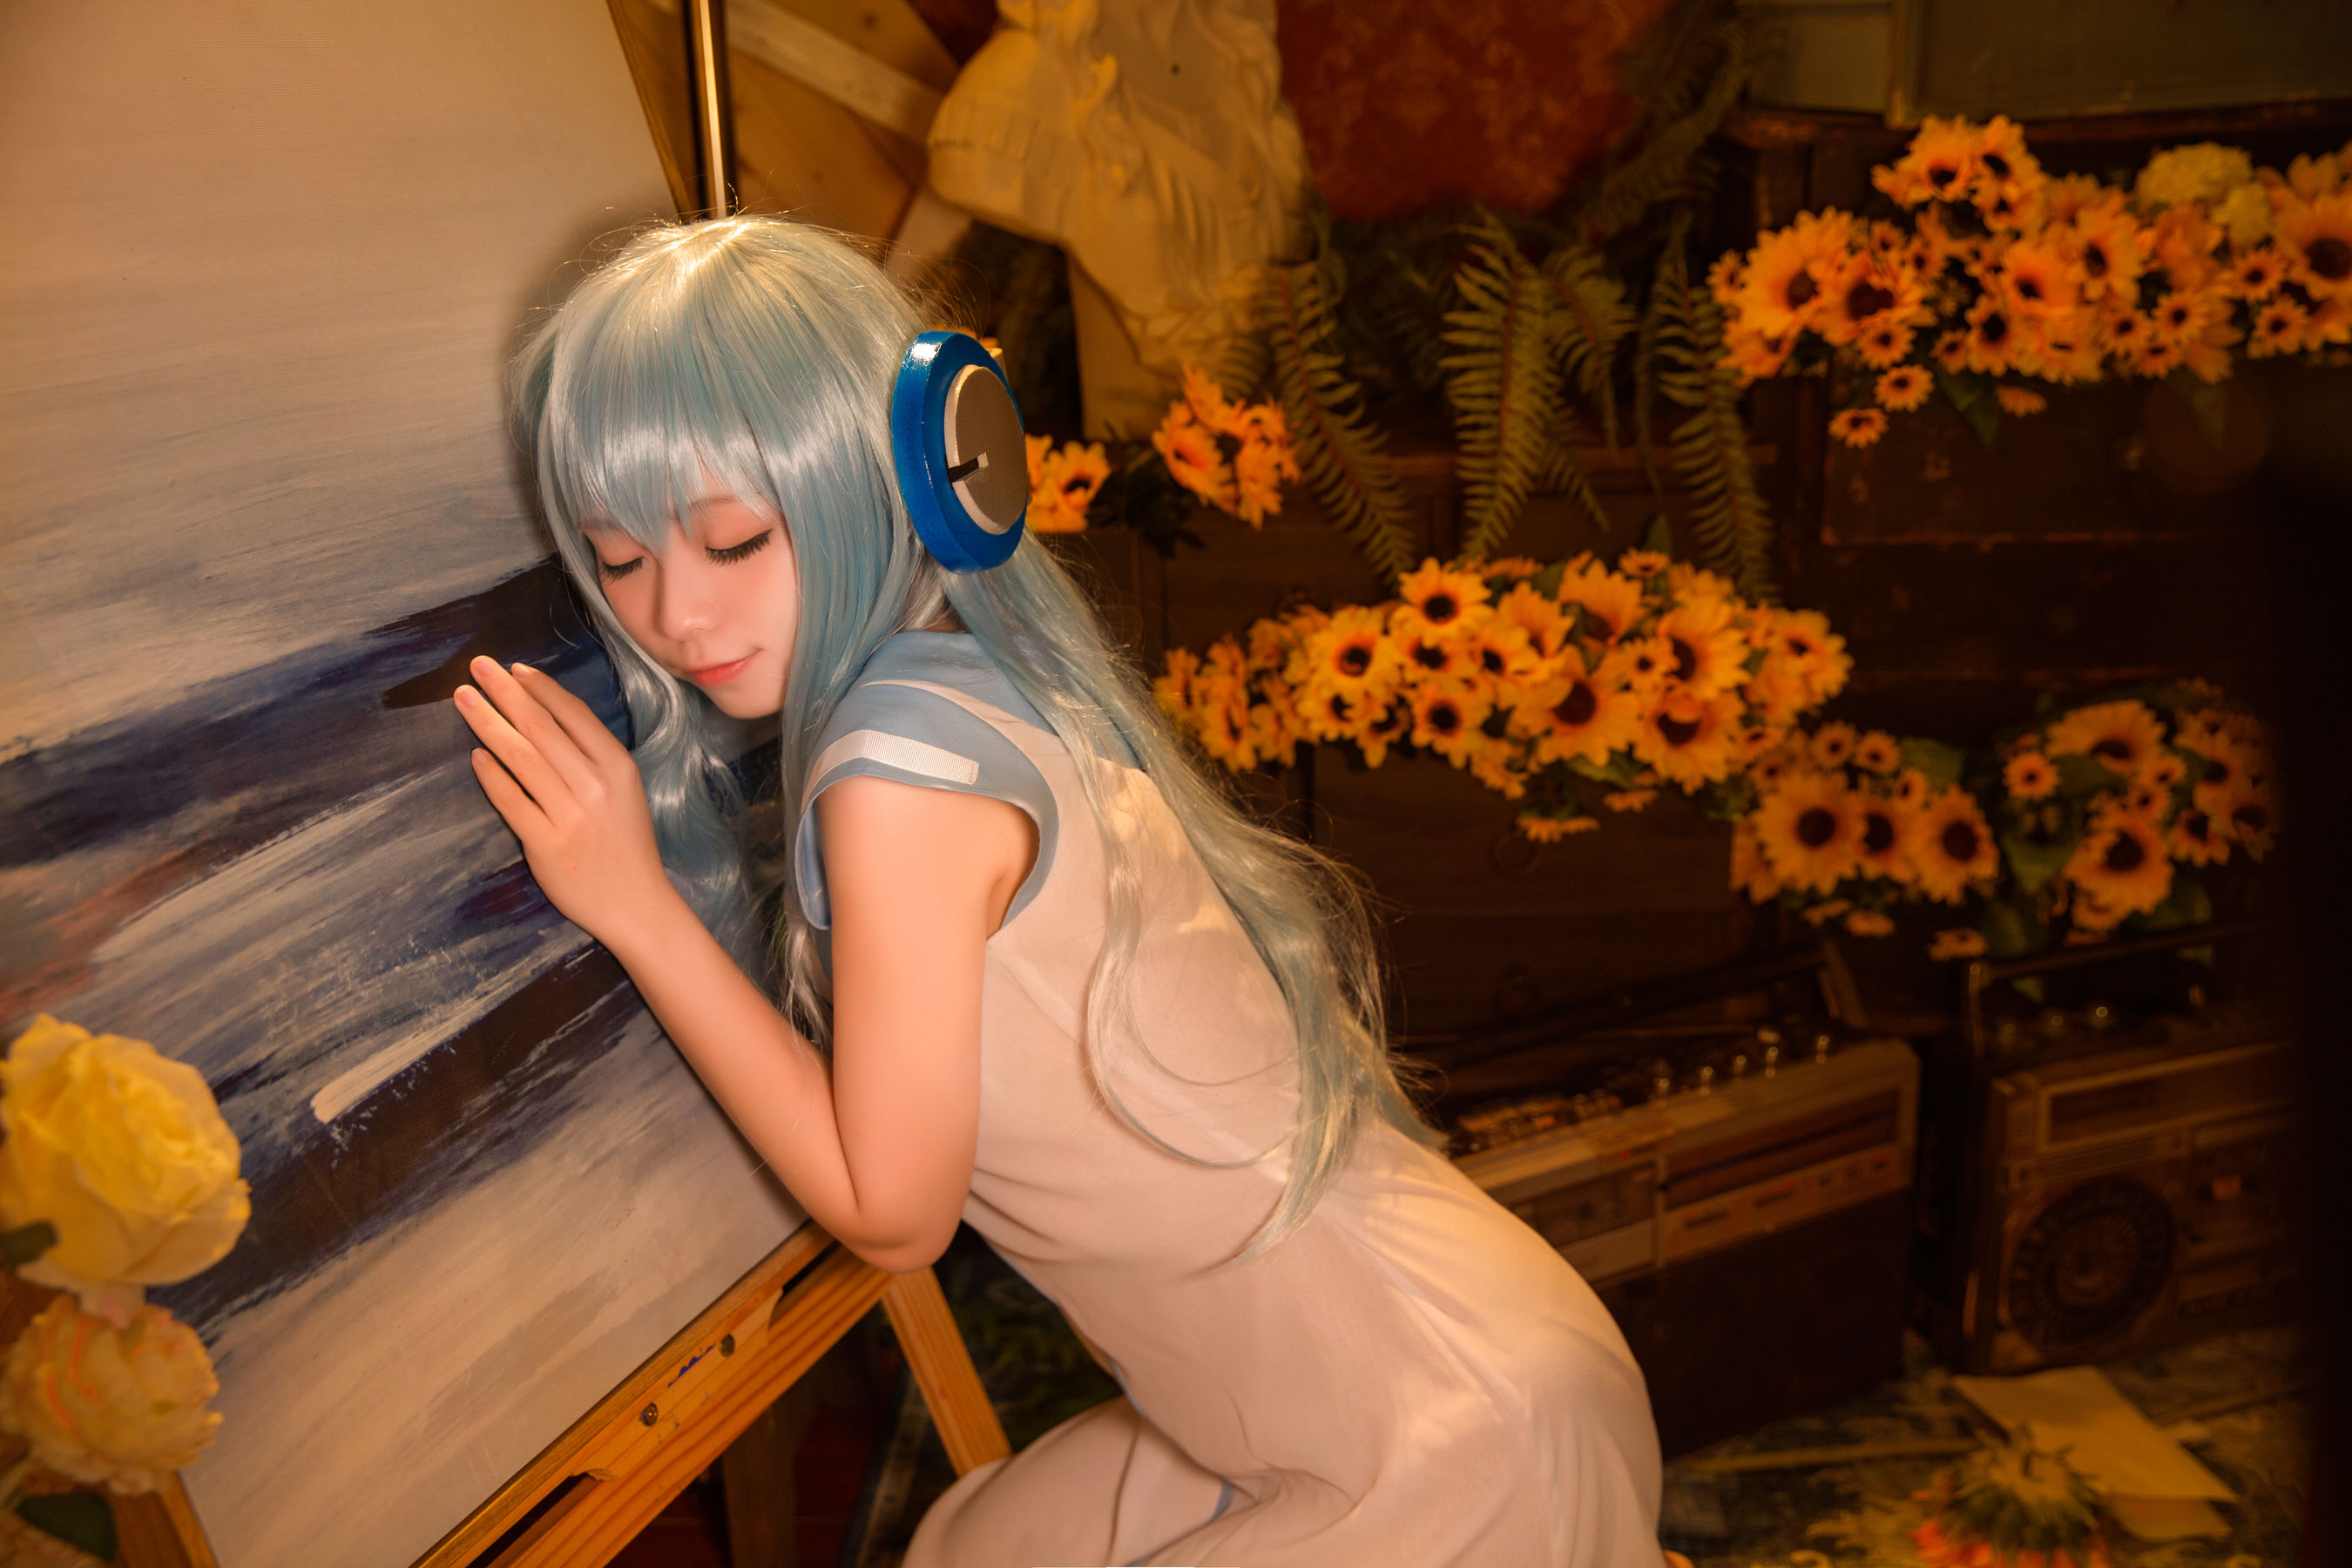 [Net Red COSER Photo] Anime blogger G44 will not be hurt - Music Box Page 7 No.d703a2